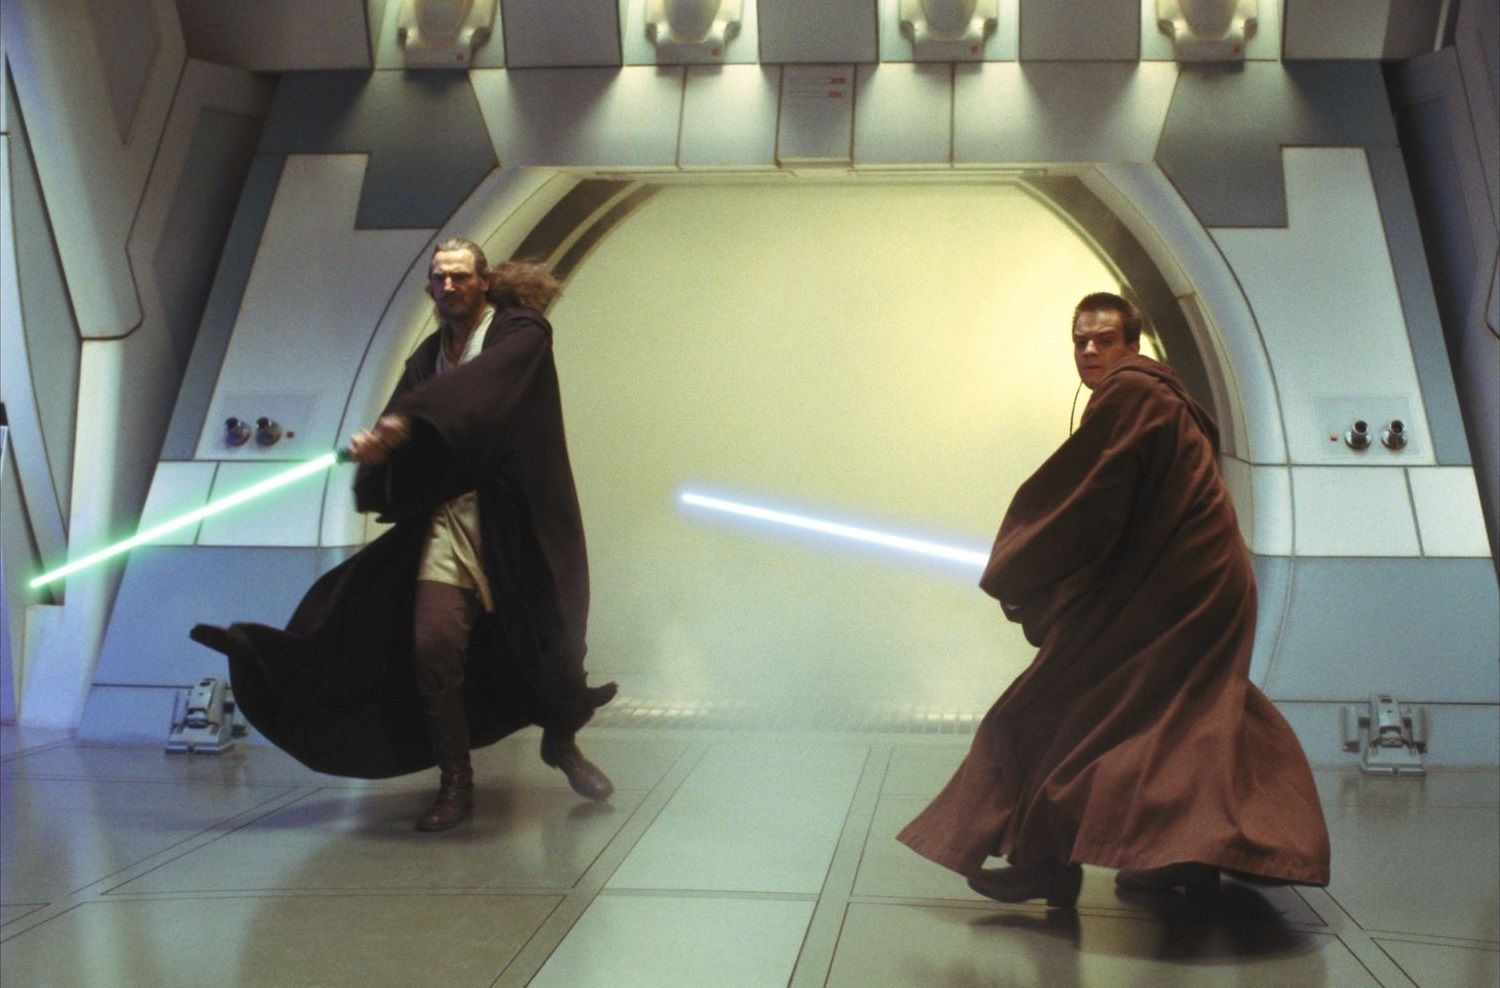 Star Wars Movies in Order: How to Watch Chronologically or by